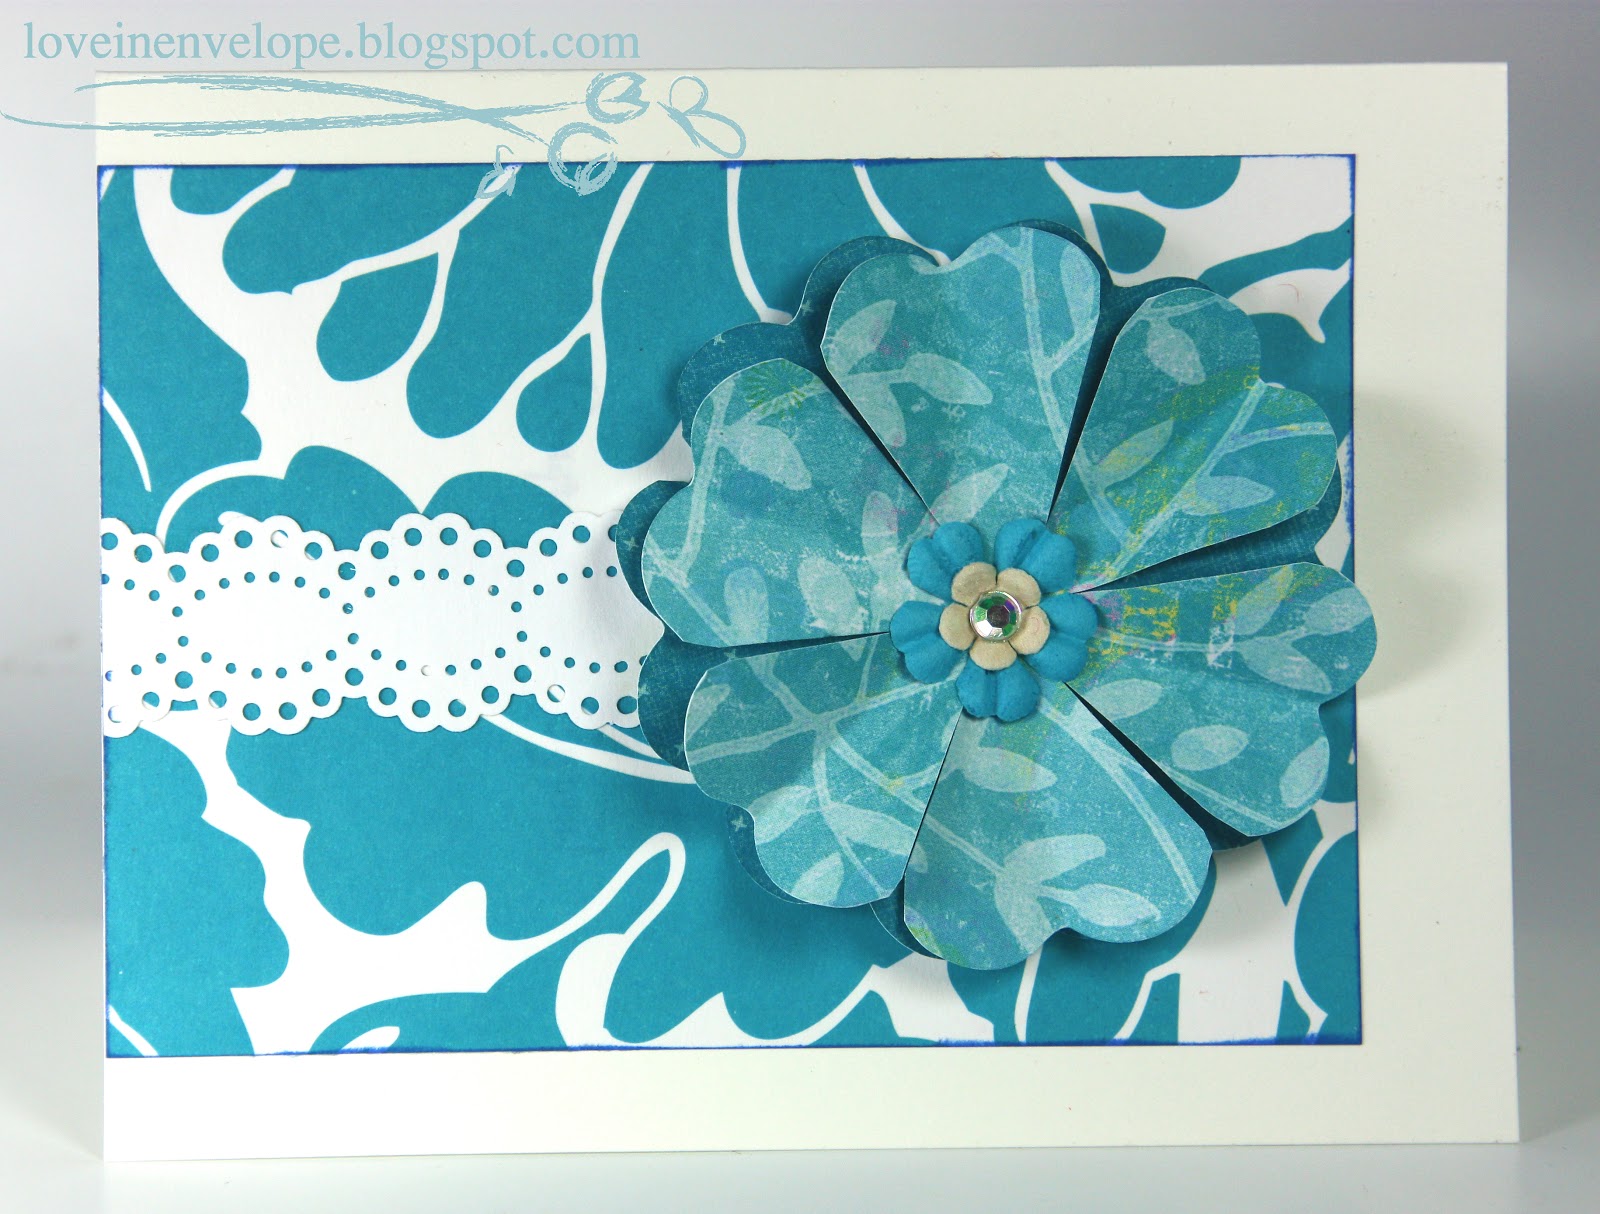 Love in Envelope: Large Teal Flower All Occasion Card